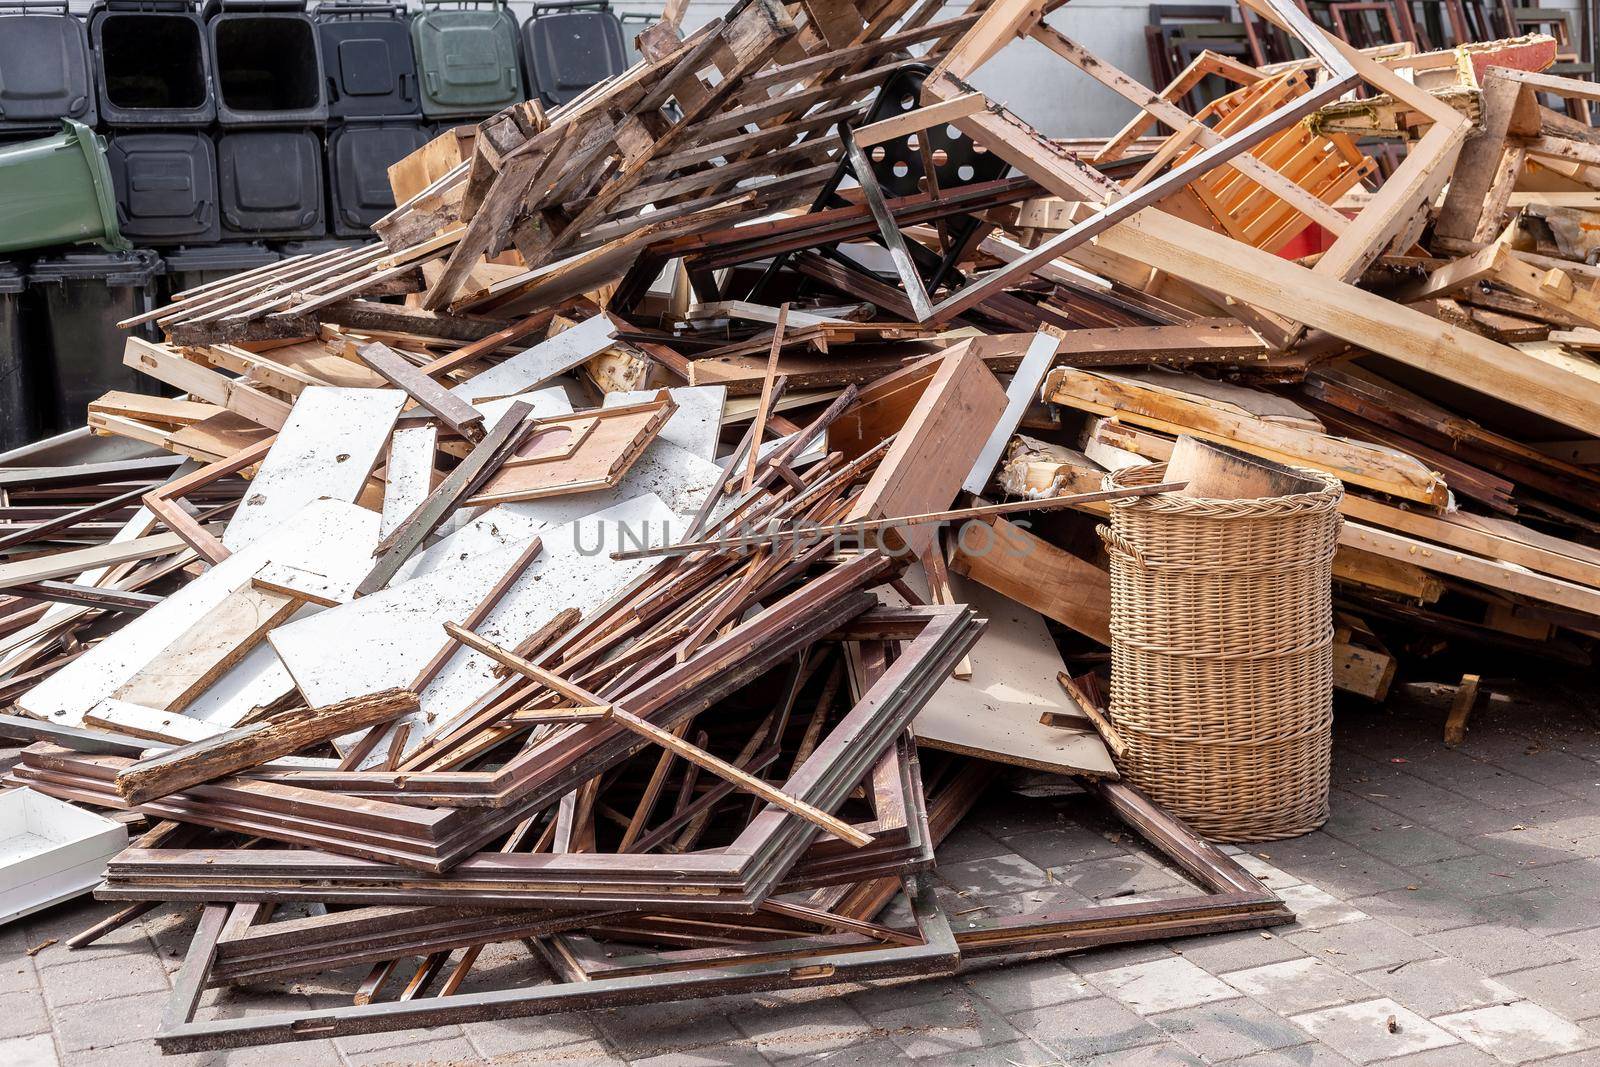 Recycling dump with trash of broken window and door frames, furniture and more